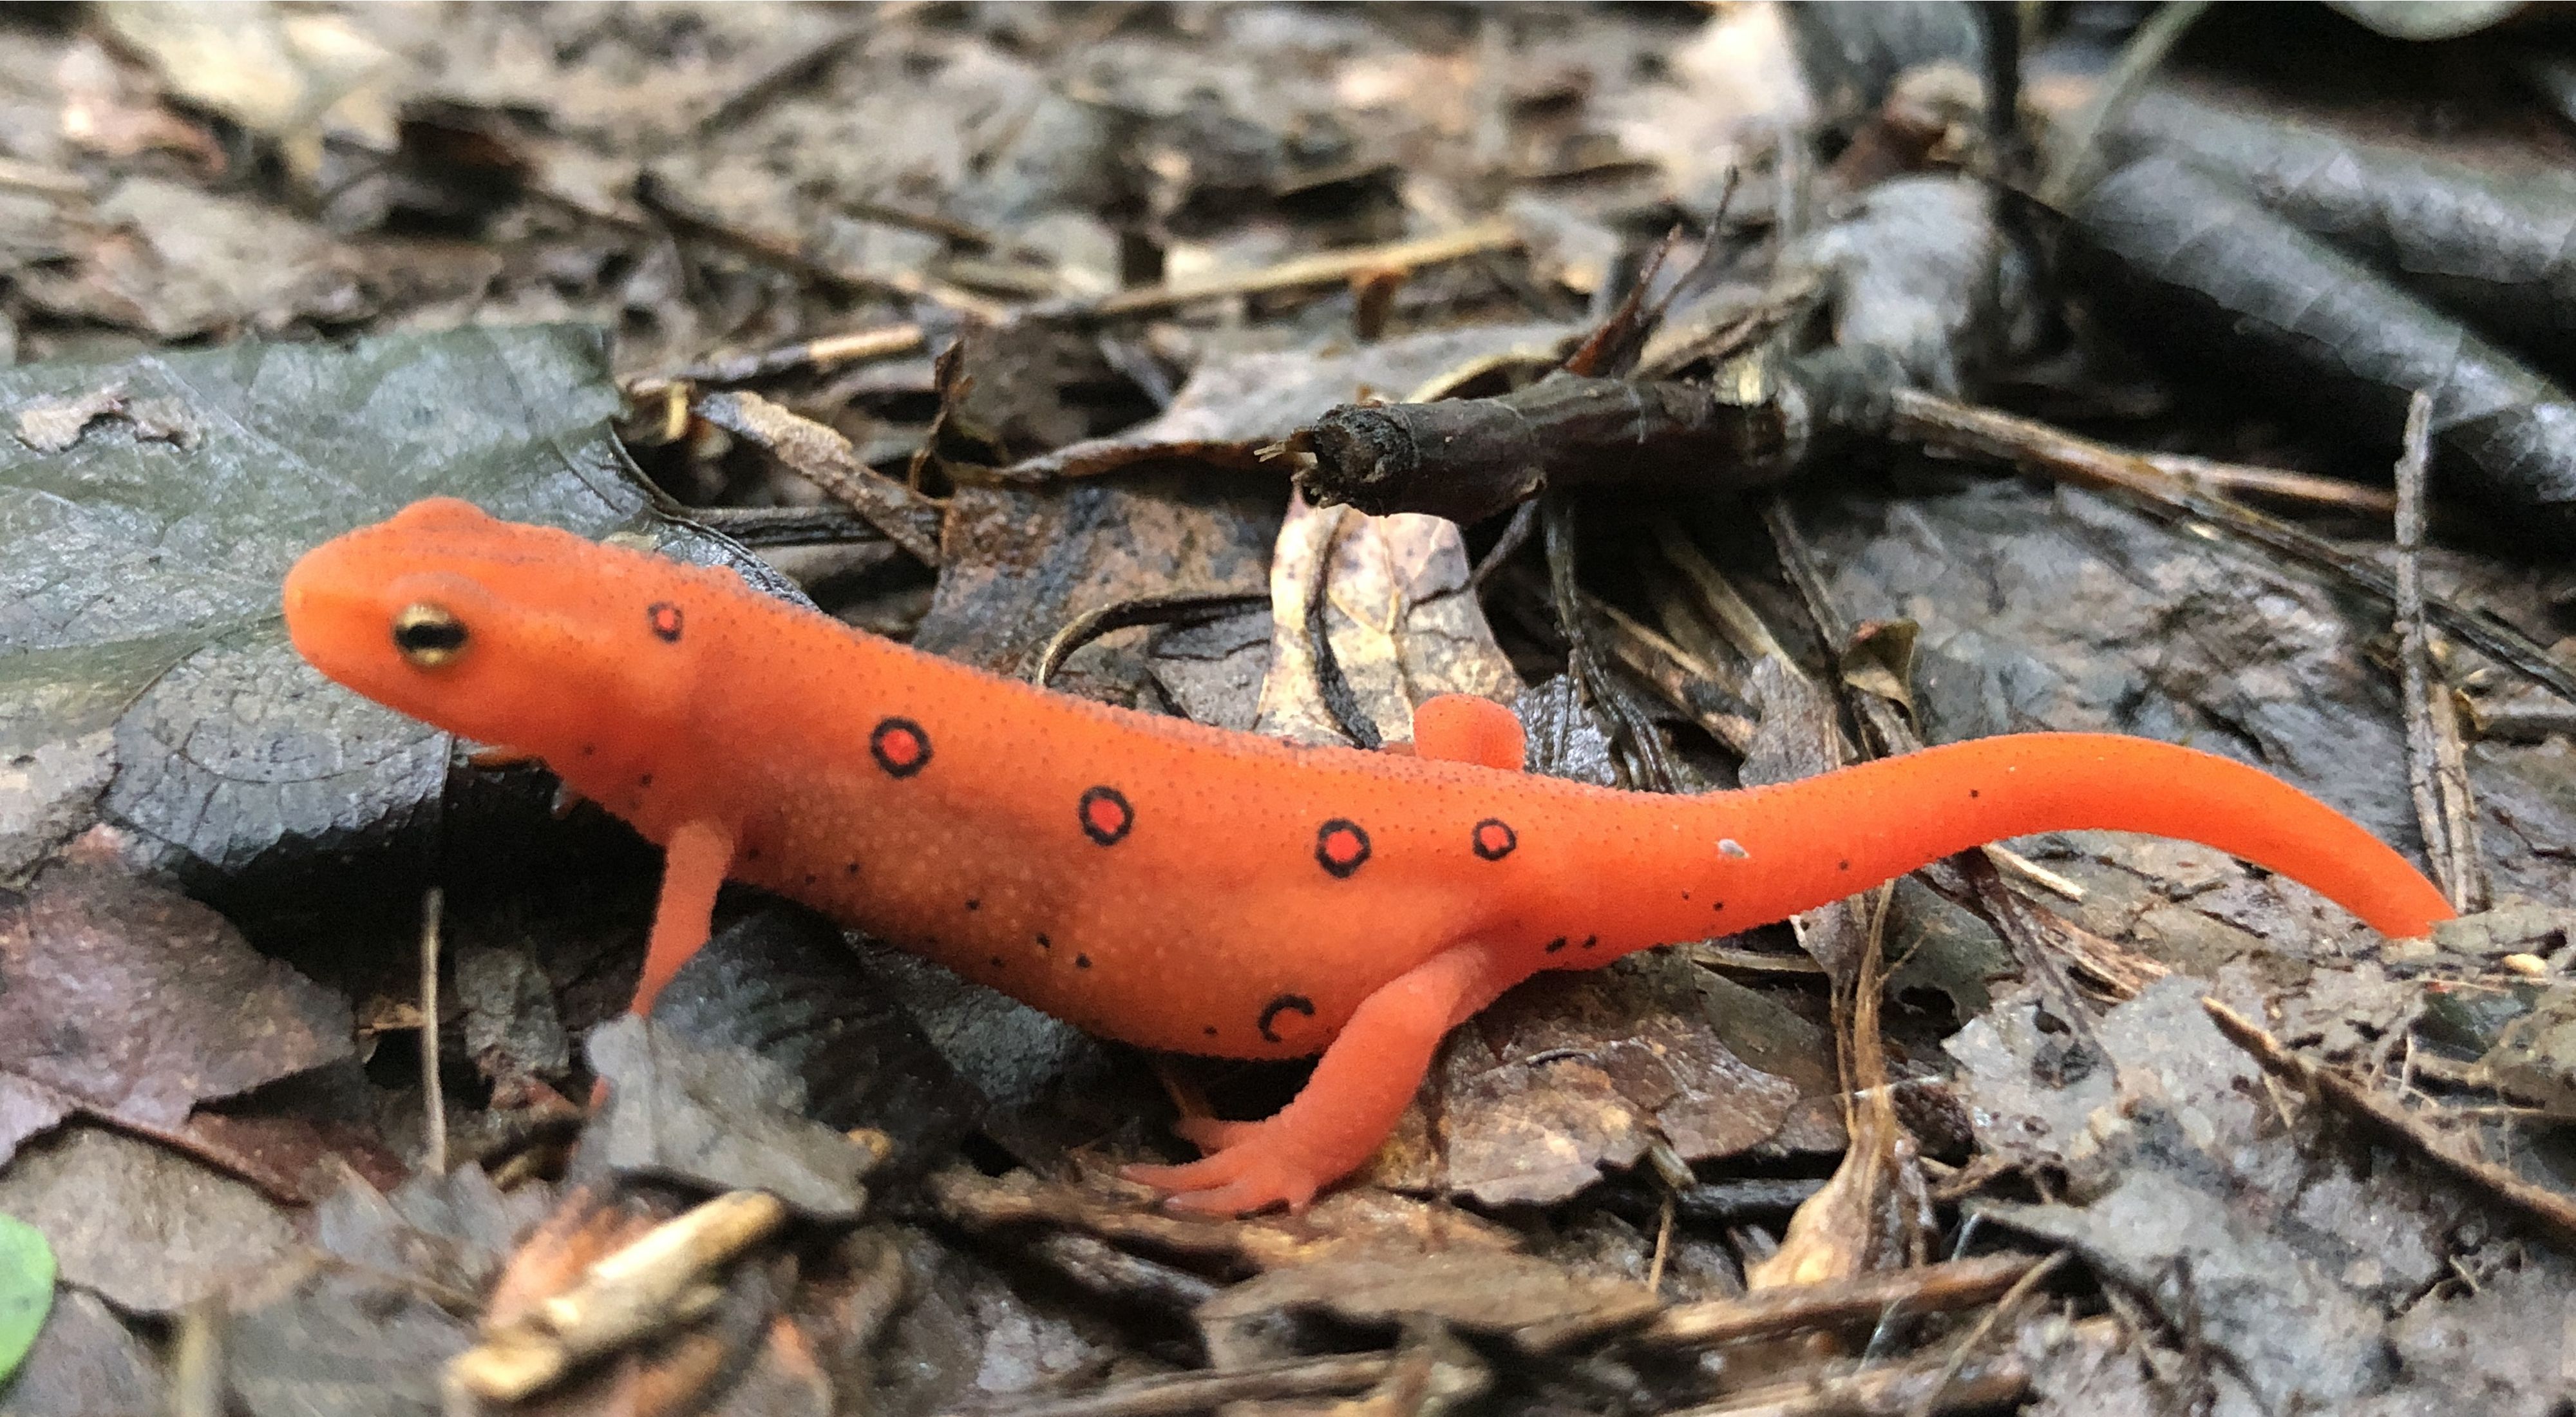 A close-up of a bright orange-red amphibian, with red spots outlined in black, on a bed of dry brown leaves.